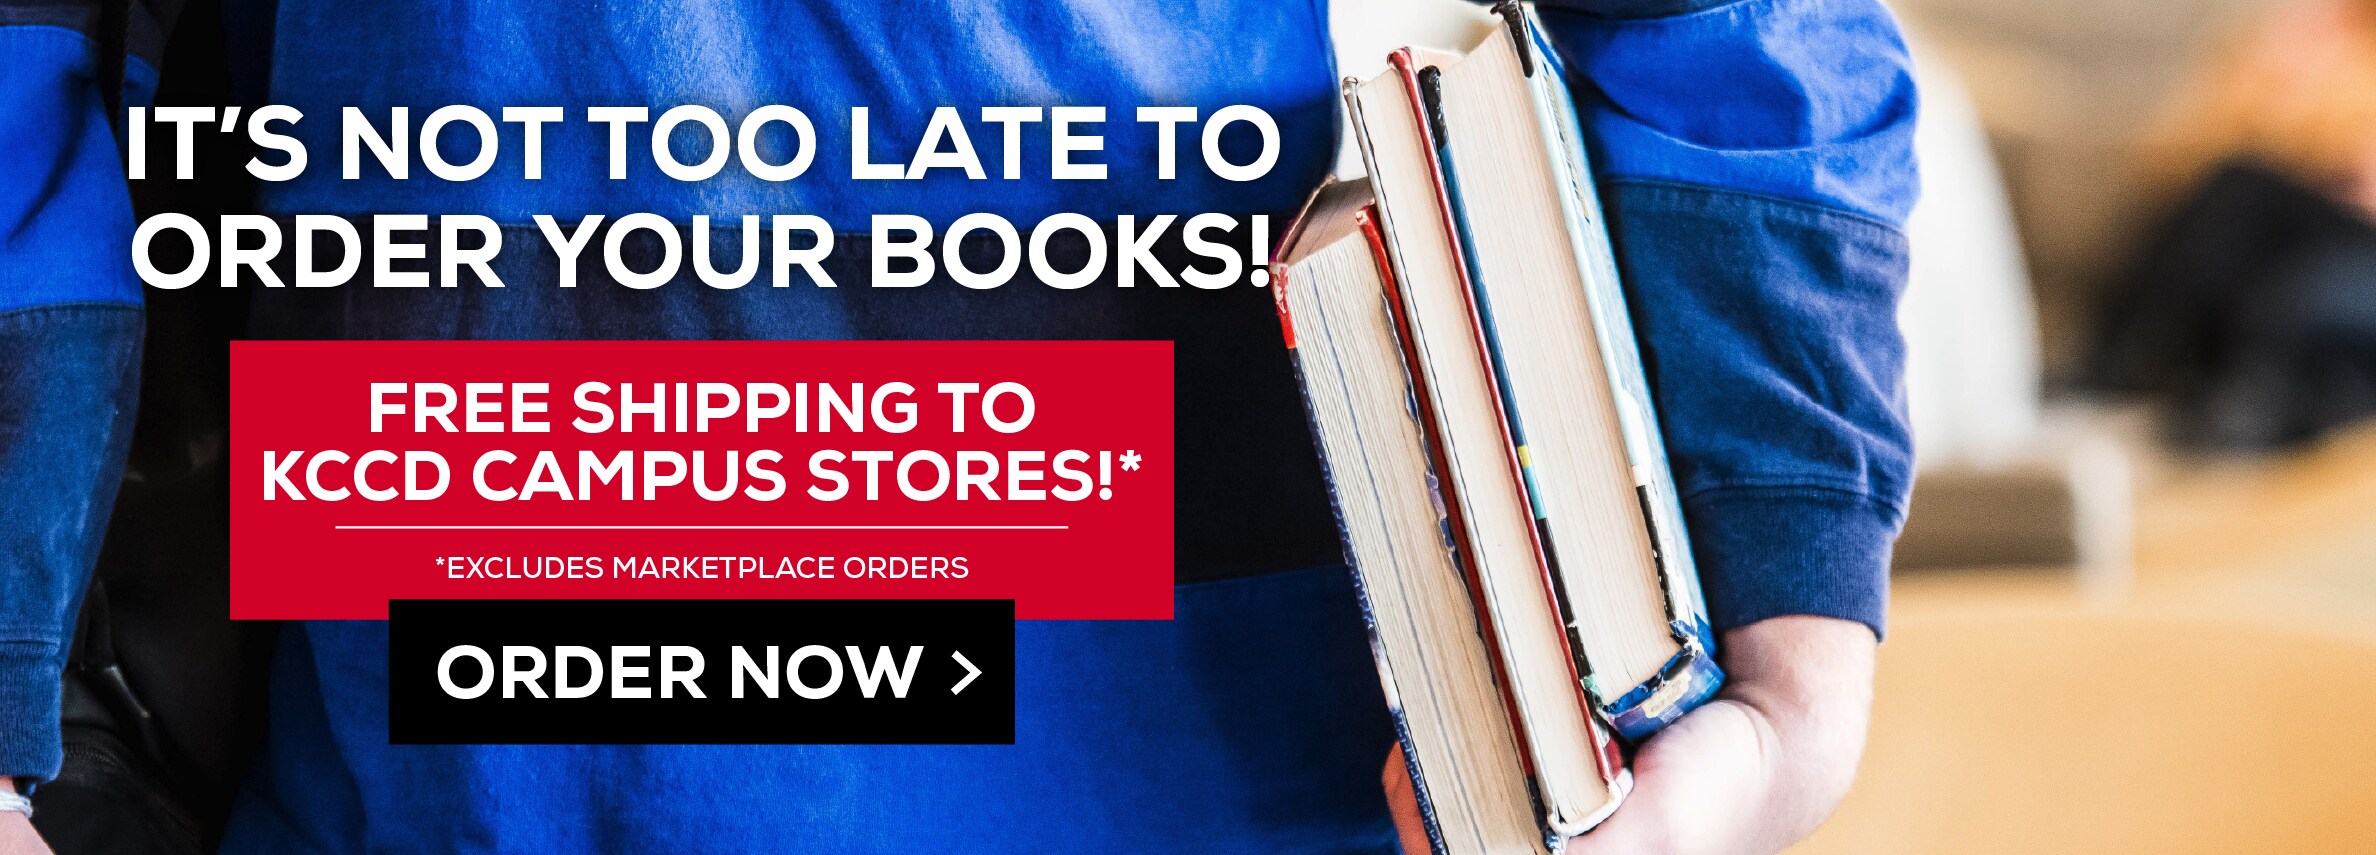 ItÃ¢â‚¬â„¢s not too late to order your books! Free shipping to KCCD Campus stores!* Excludes marketplace purchases. Order Now.